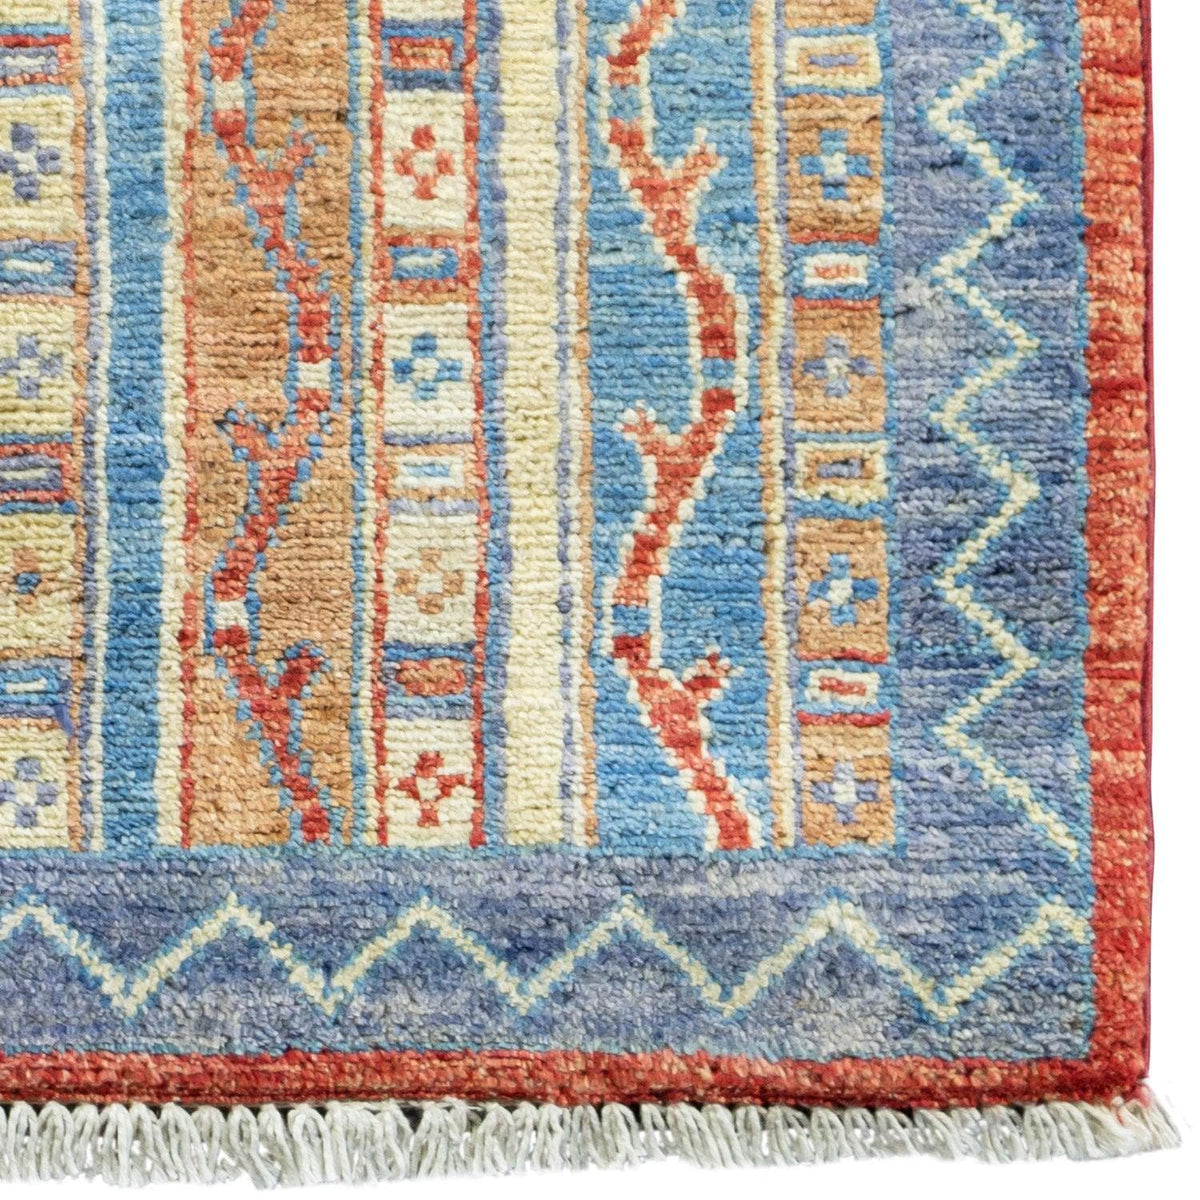 Fine Hand-knotted Small Tribal Rug 45cm x 60cm